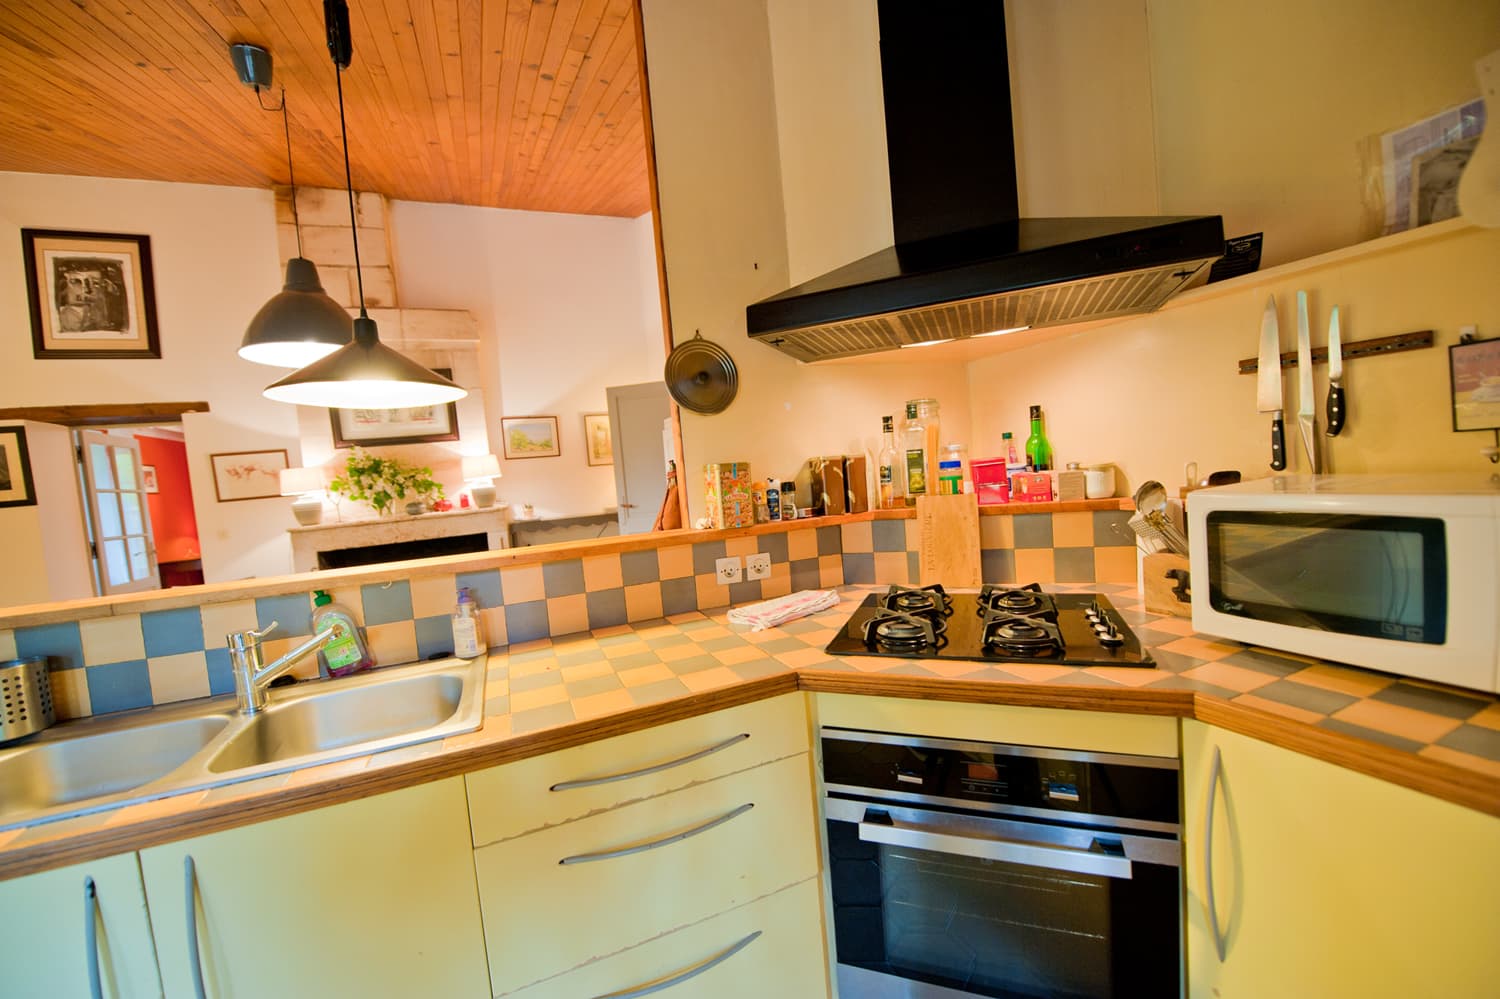 Kitchen in South West France rental home